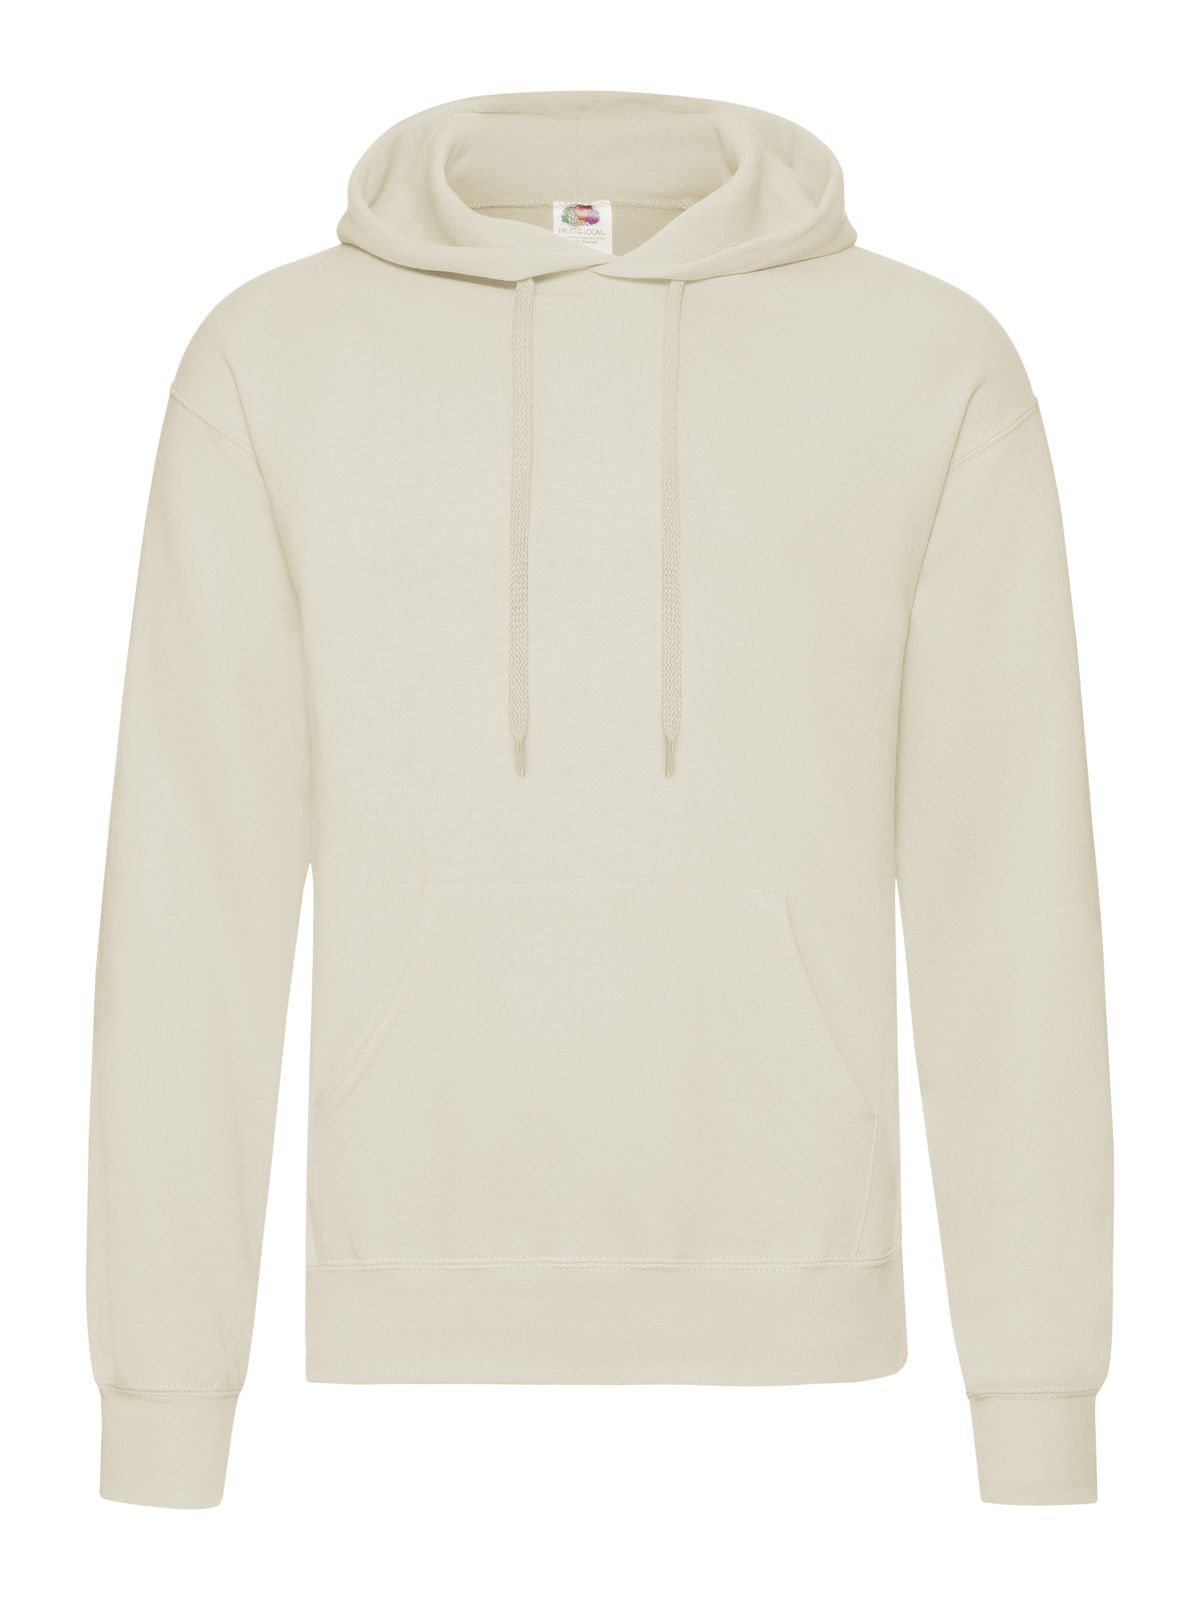 classic-hooded-sweat-natural.webp